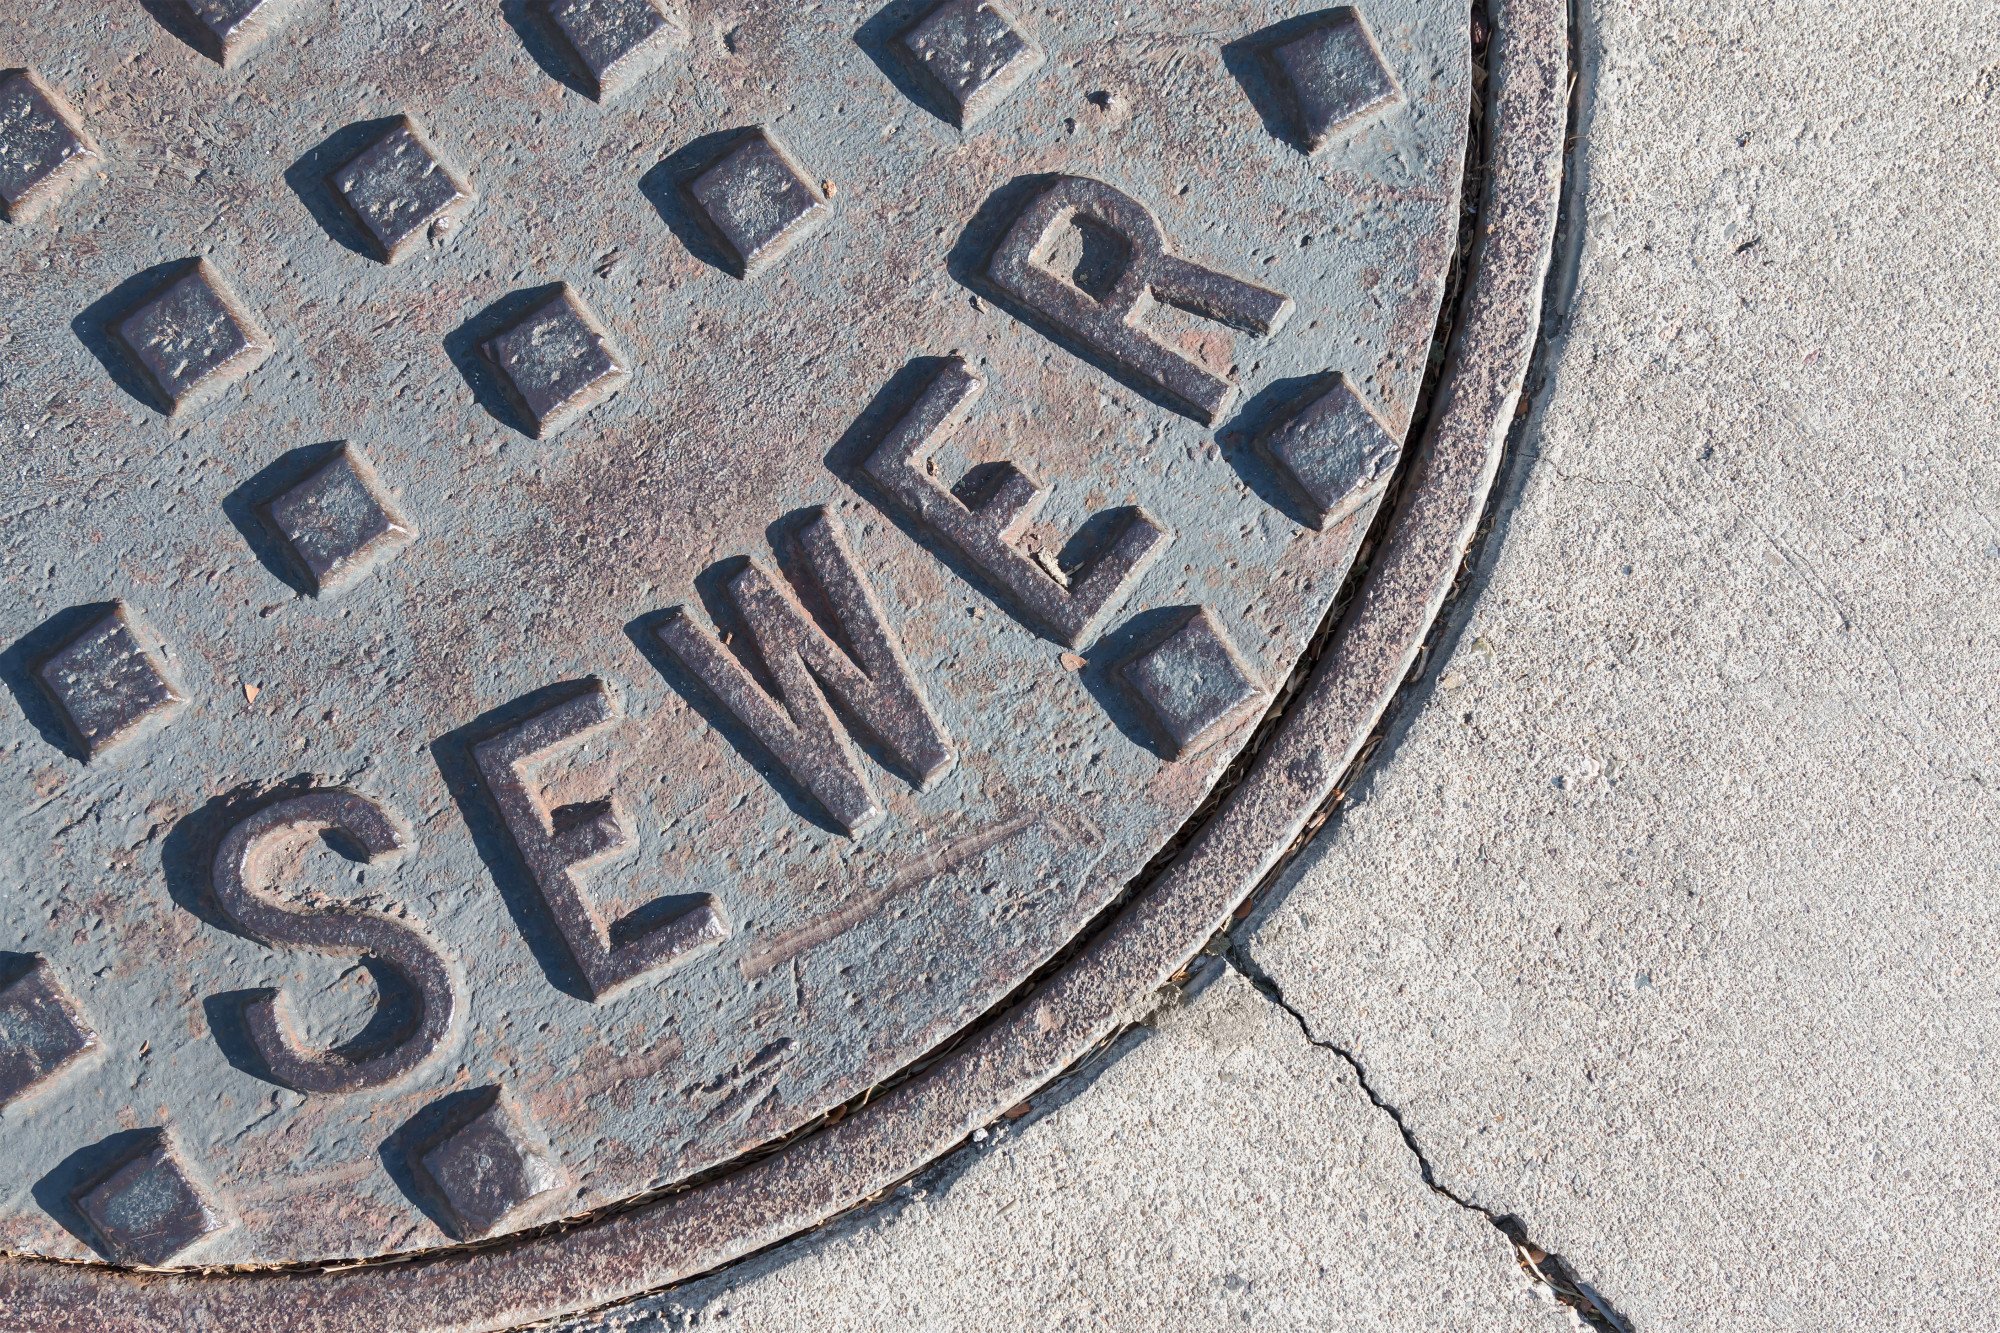 Clogged drains are always a problem. When it comes to cleaning sewer lines, hydro-jetting is one of the most innovative solutions available. Learn more here!